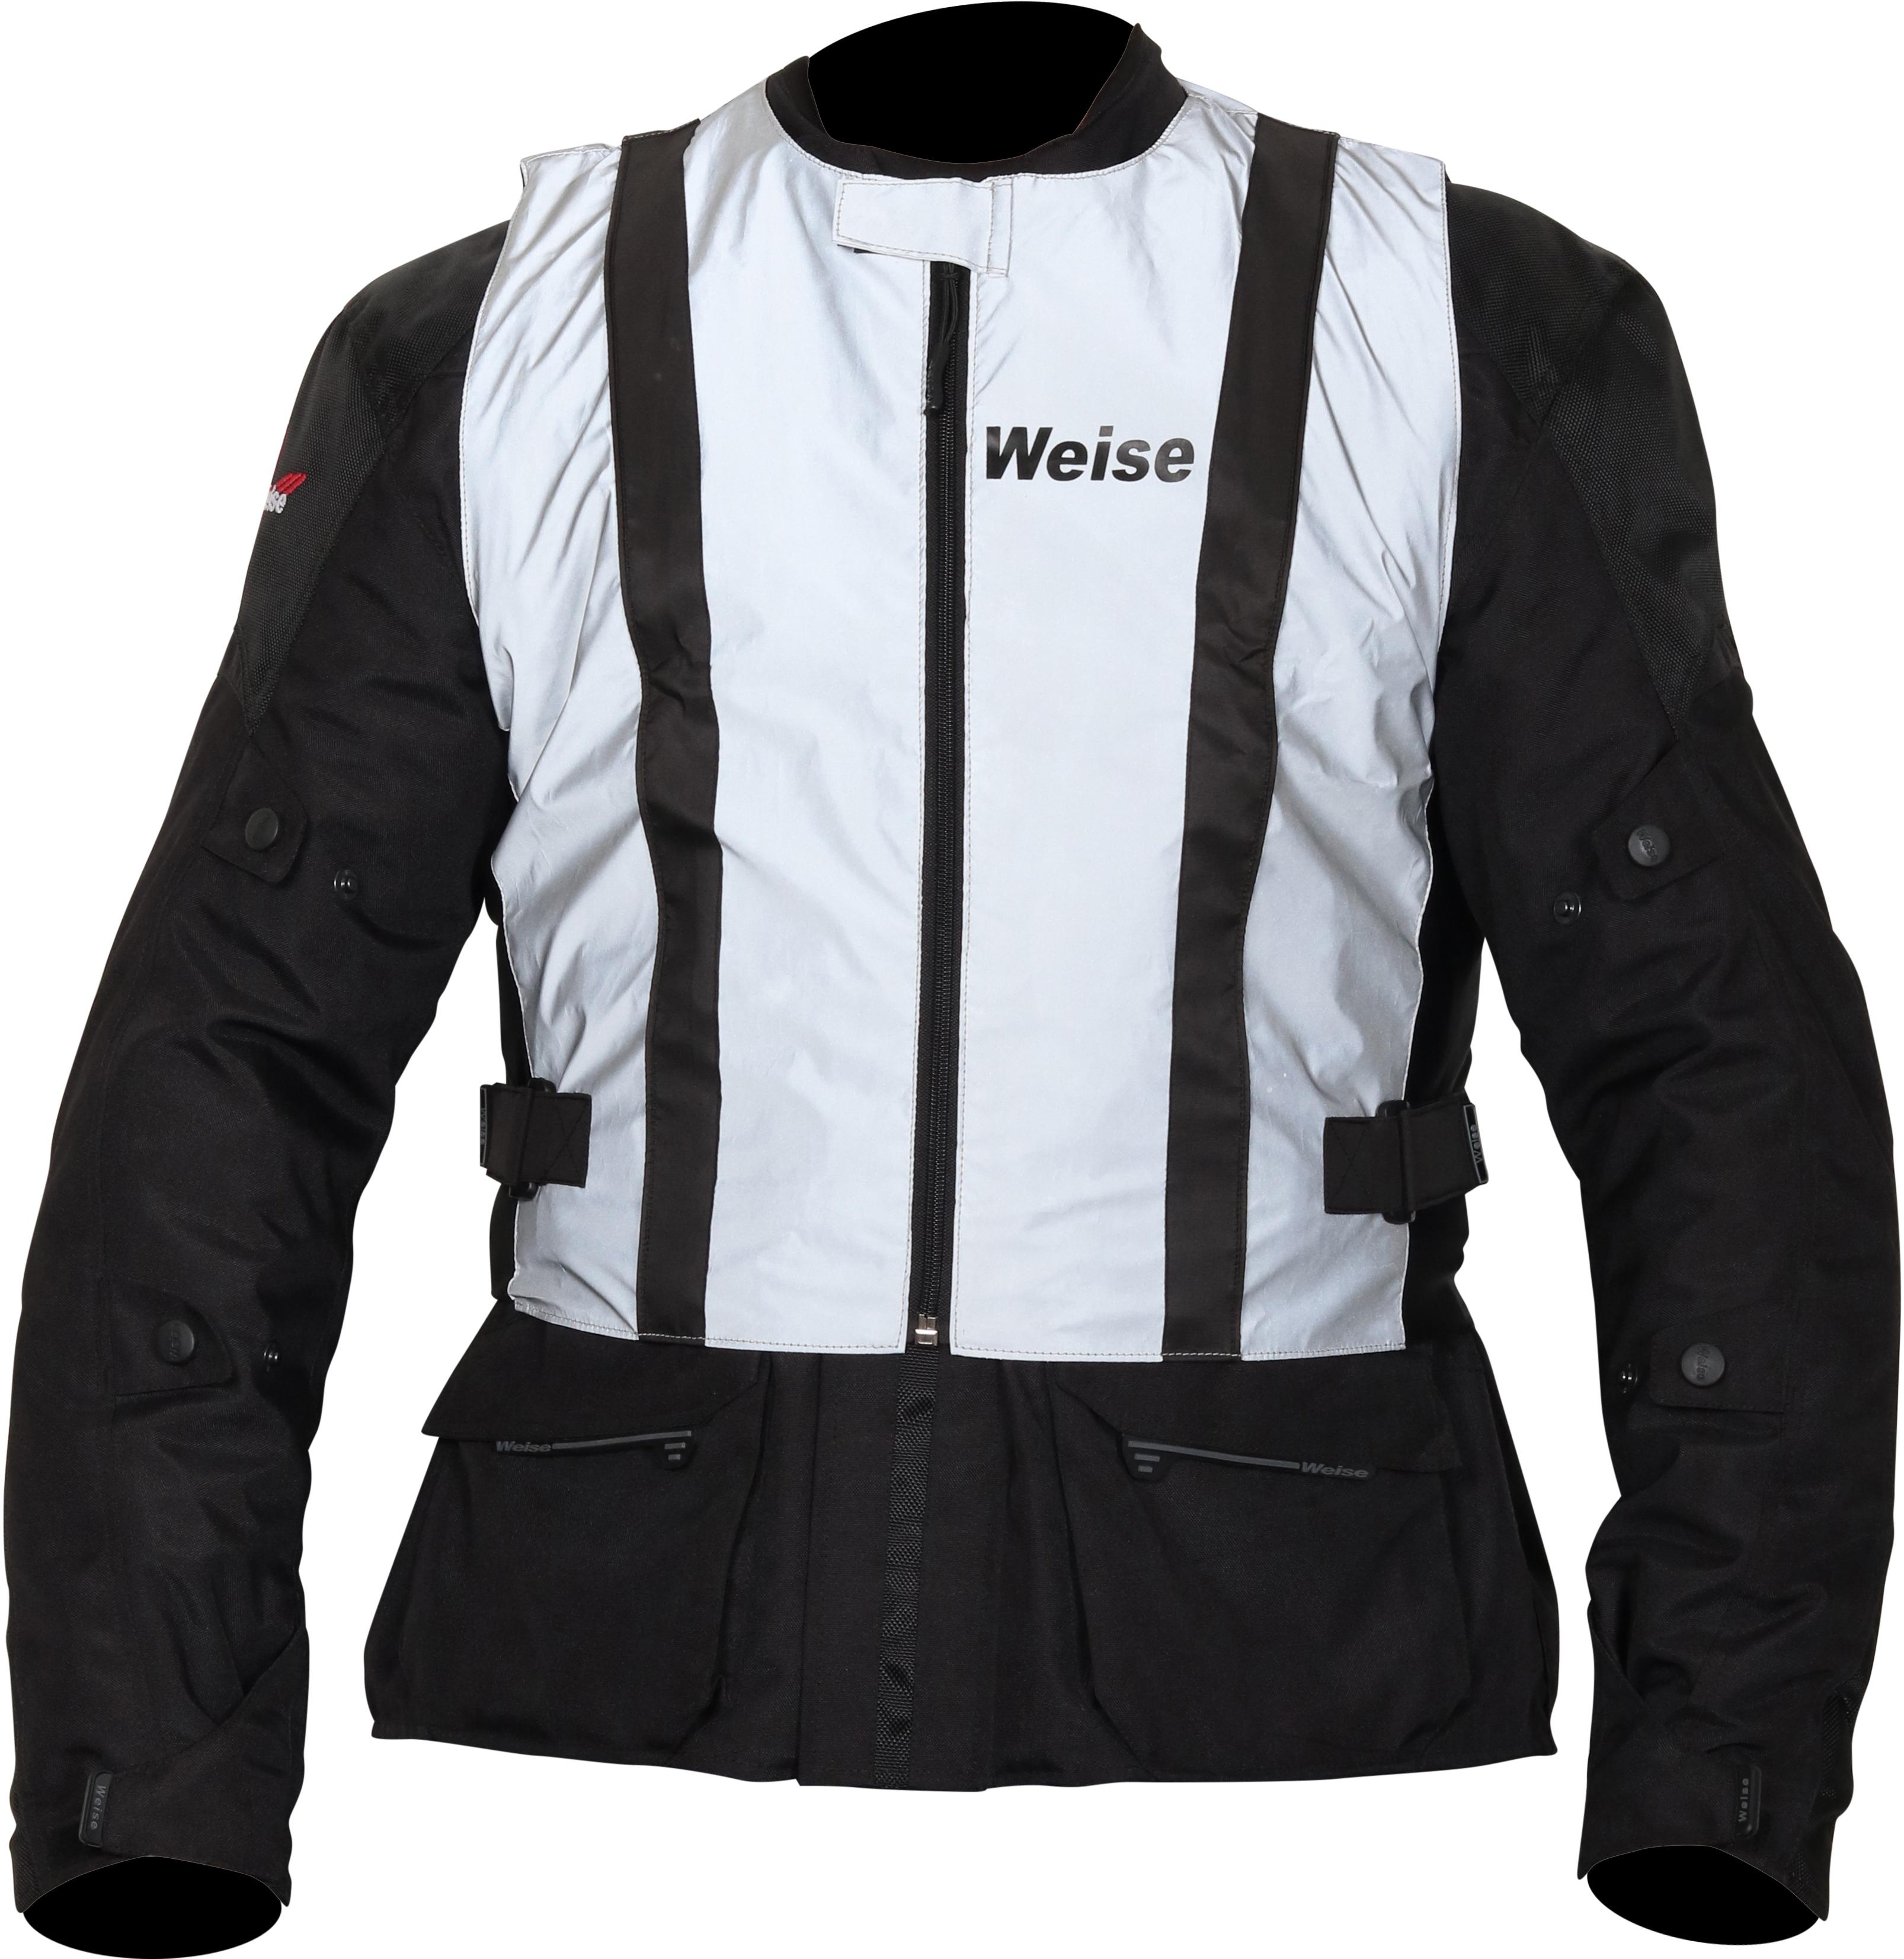 Weise Vision Gilet Sm/Me